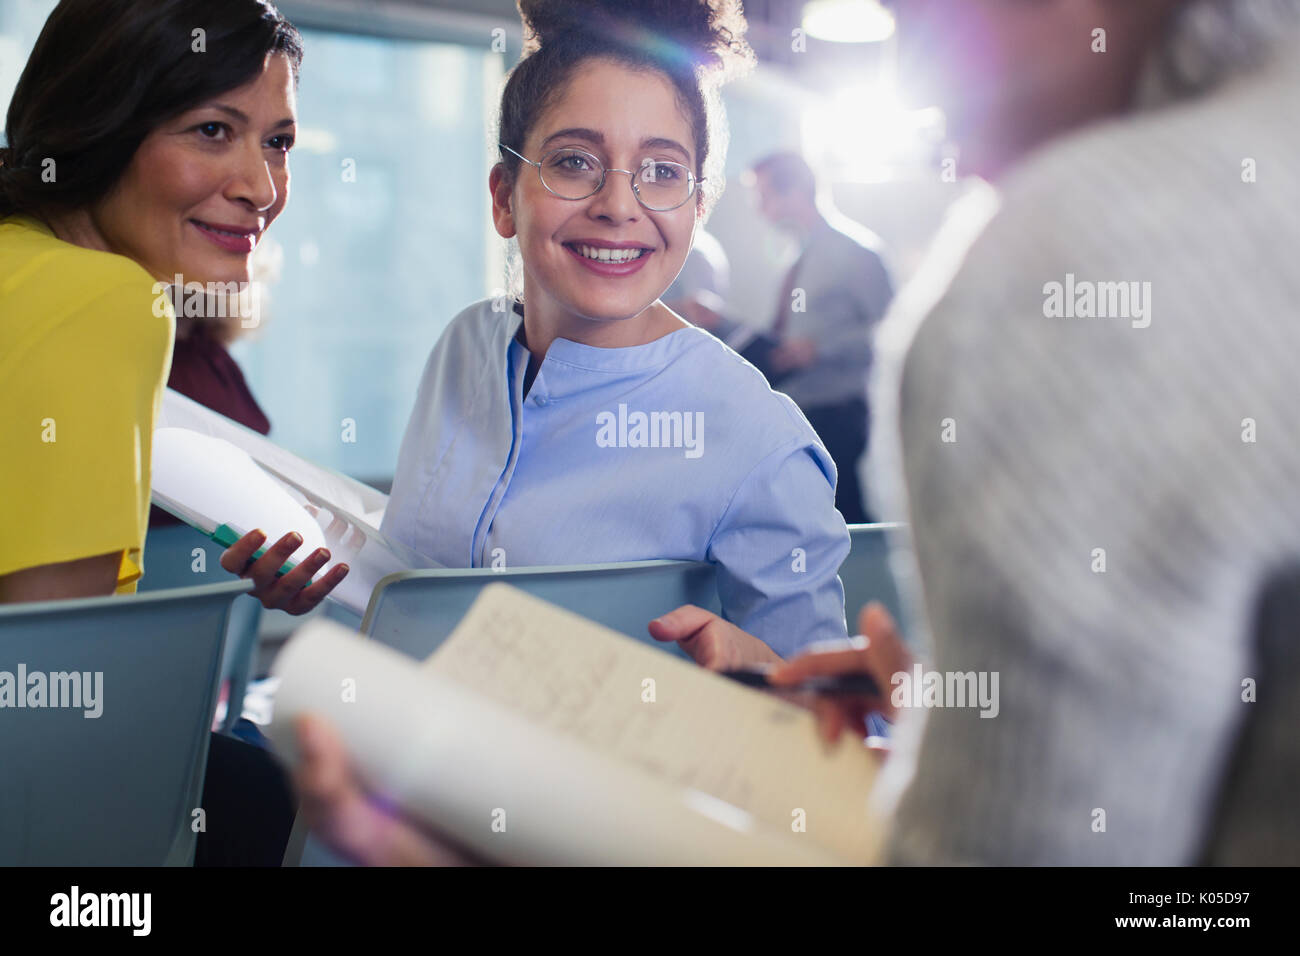 Smiling businesswomen discussing paperwork in conference audience Stock Photo